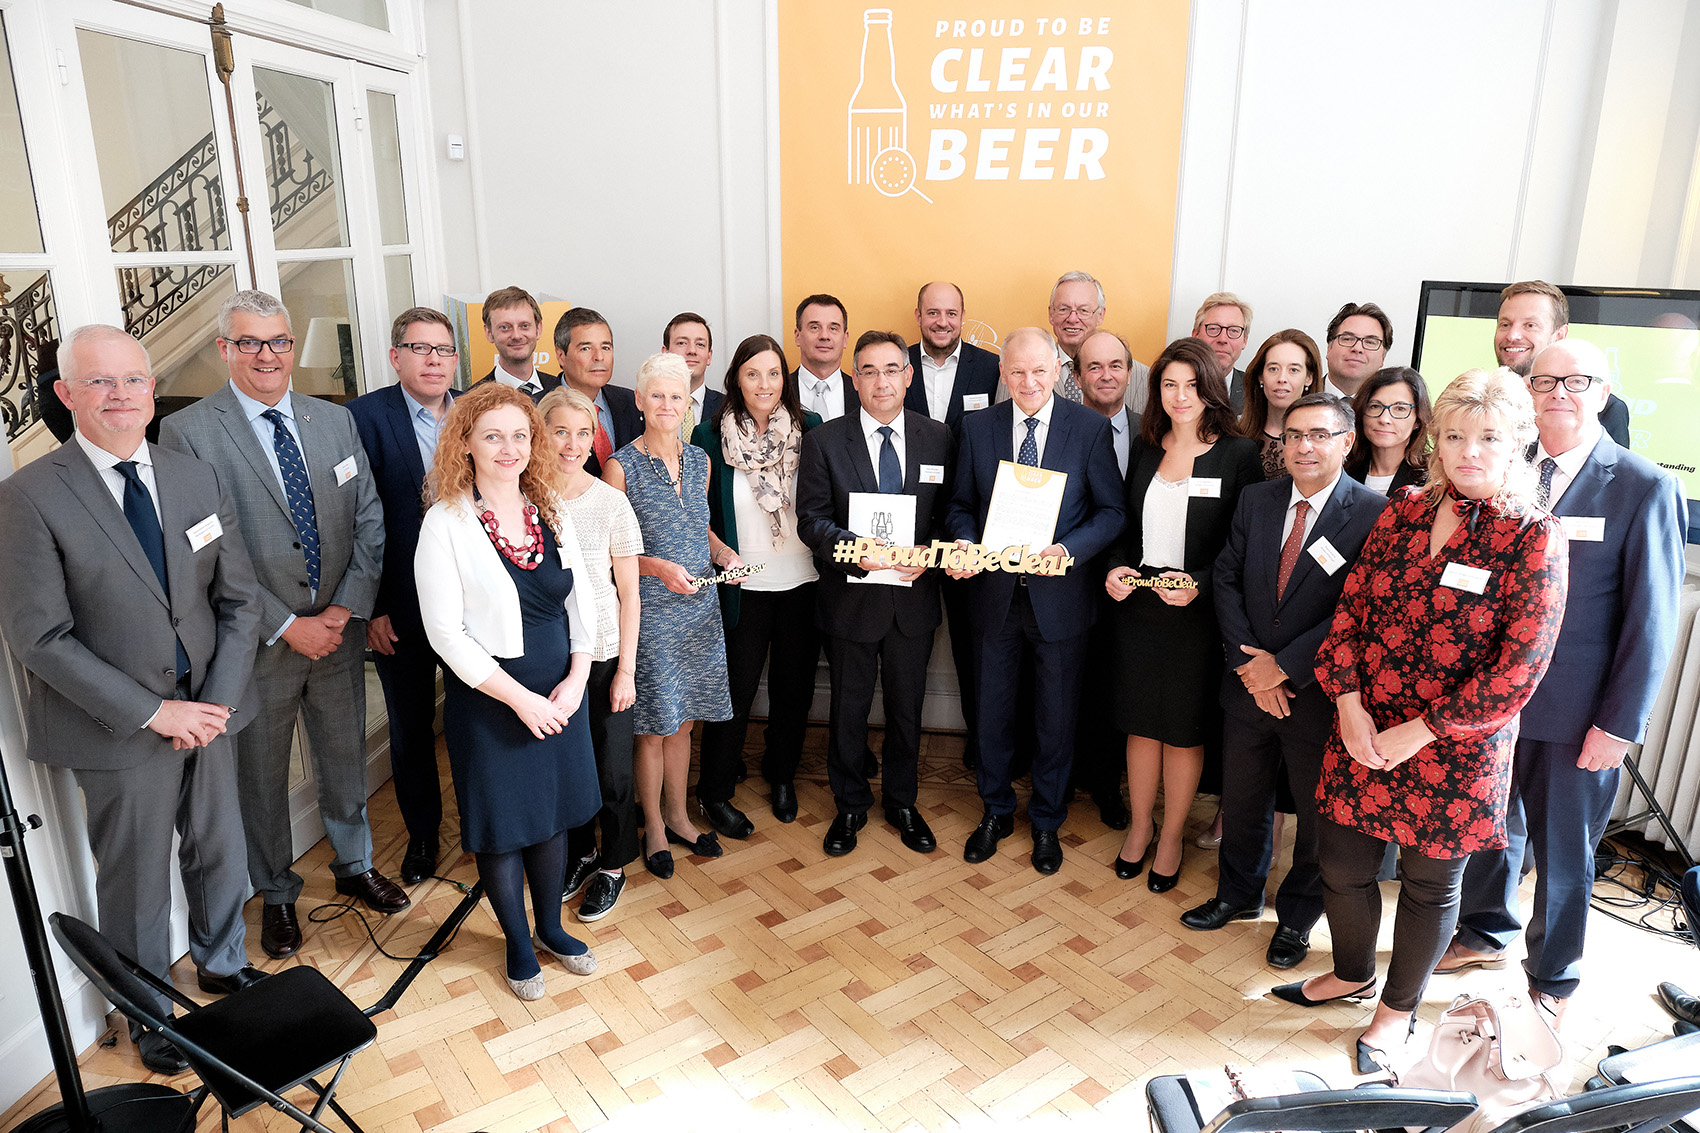 European brewers and the European Commission signed a memorandum of nutrition information in beer